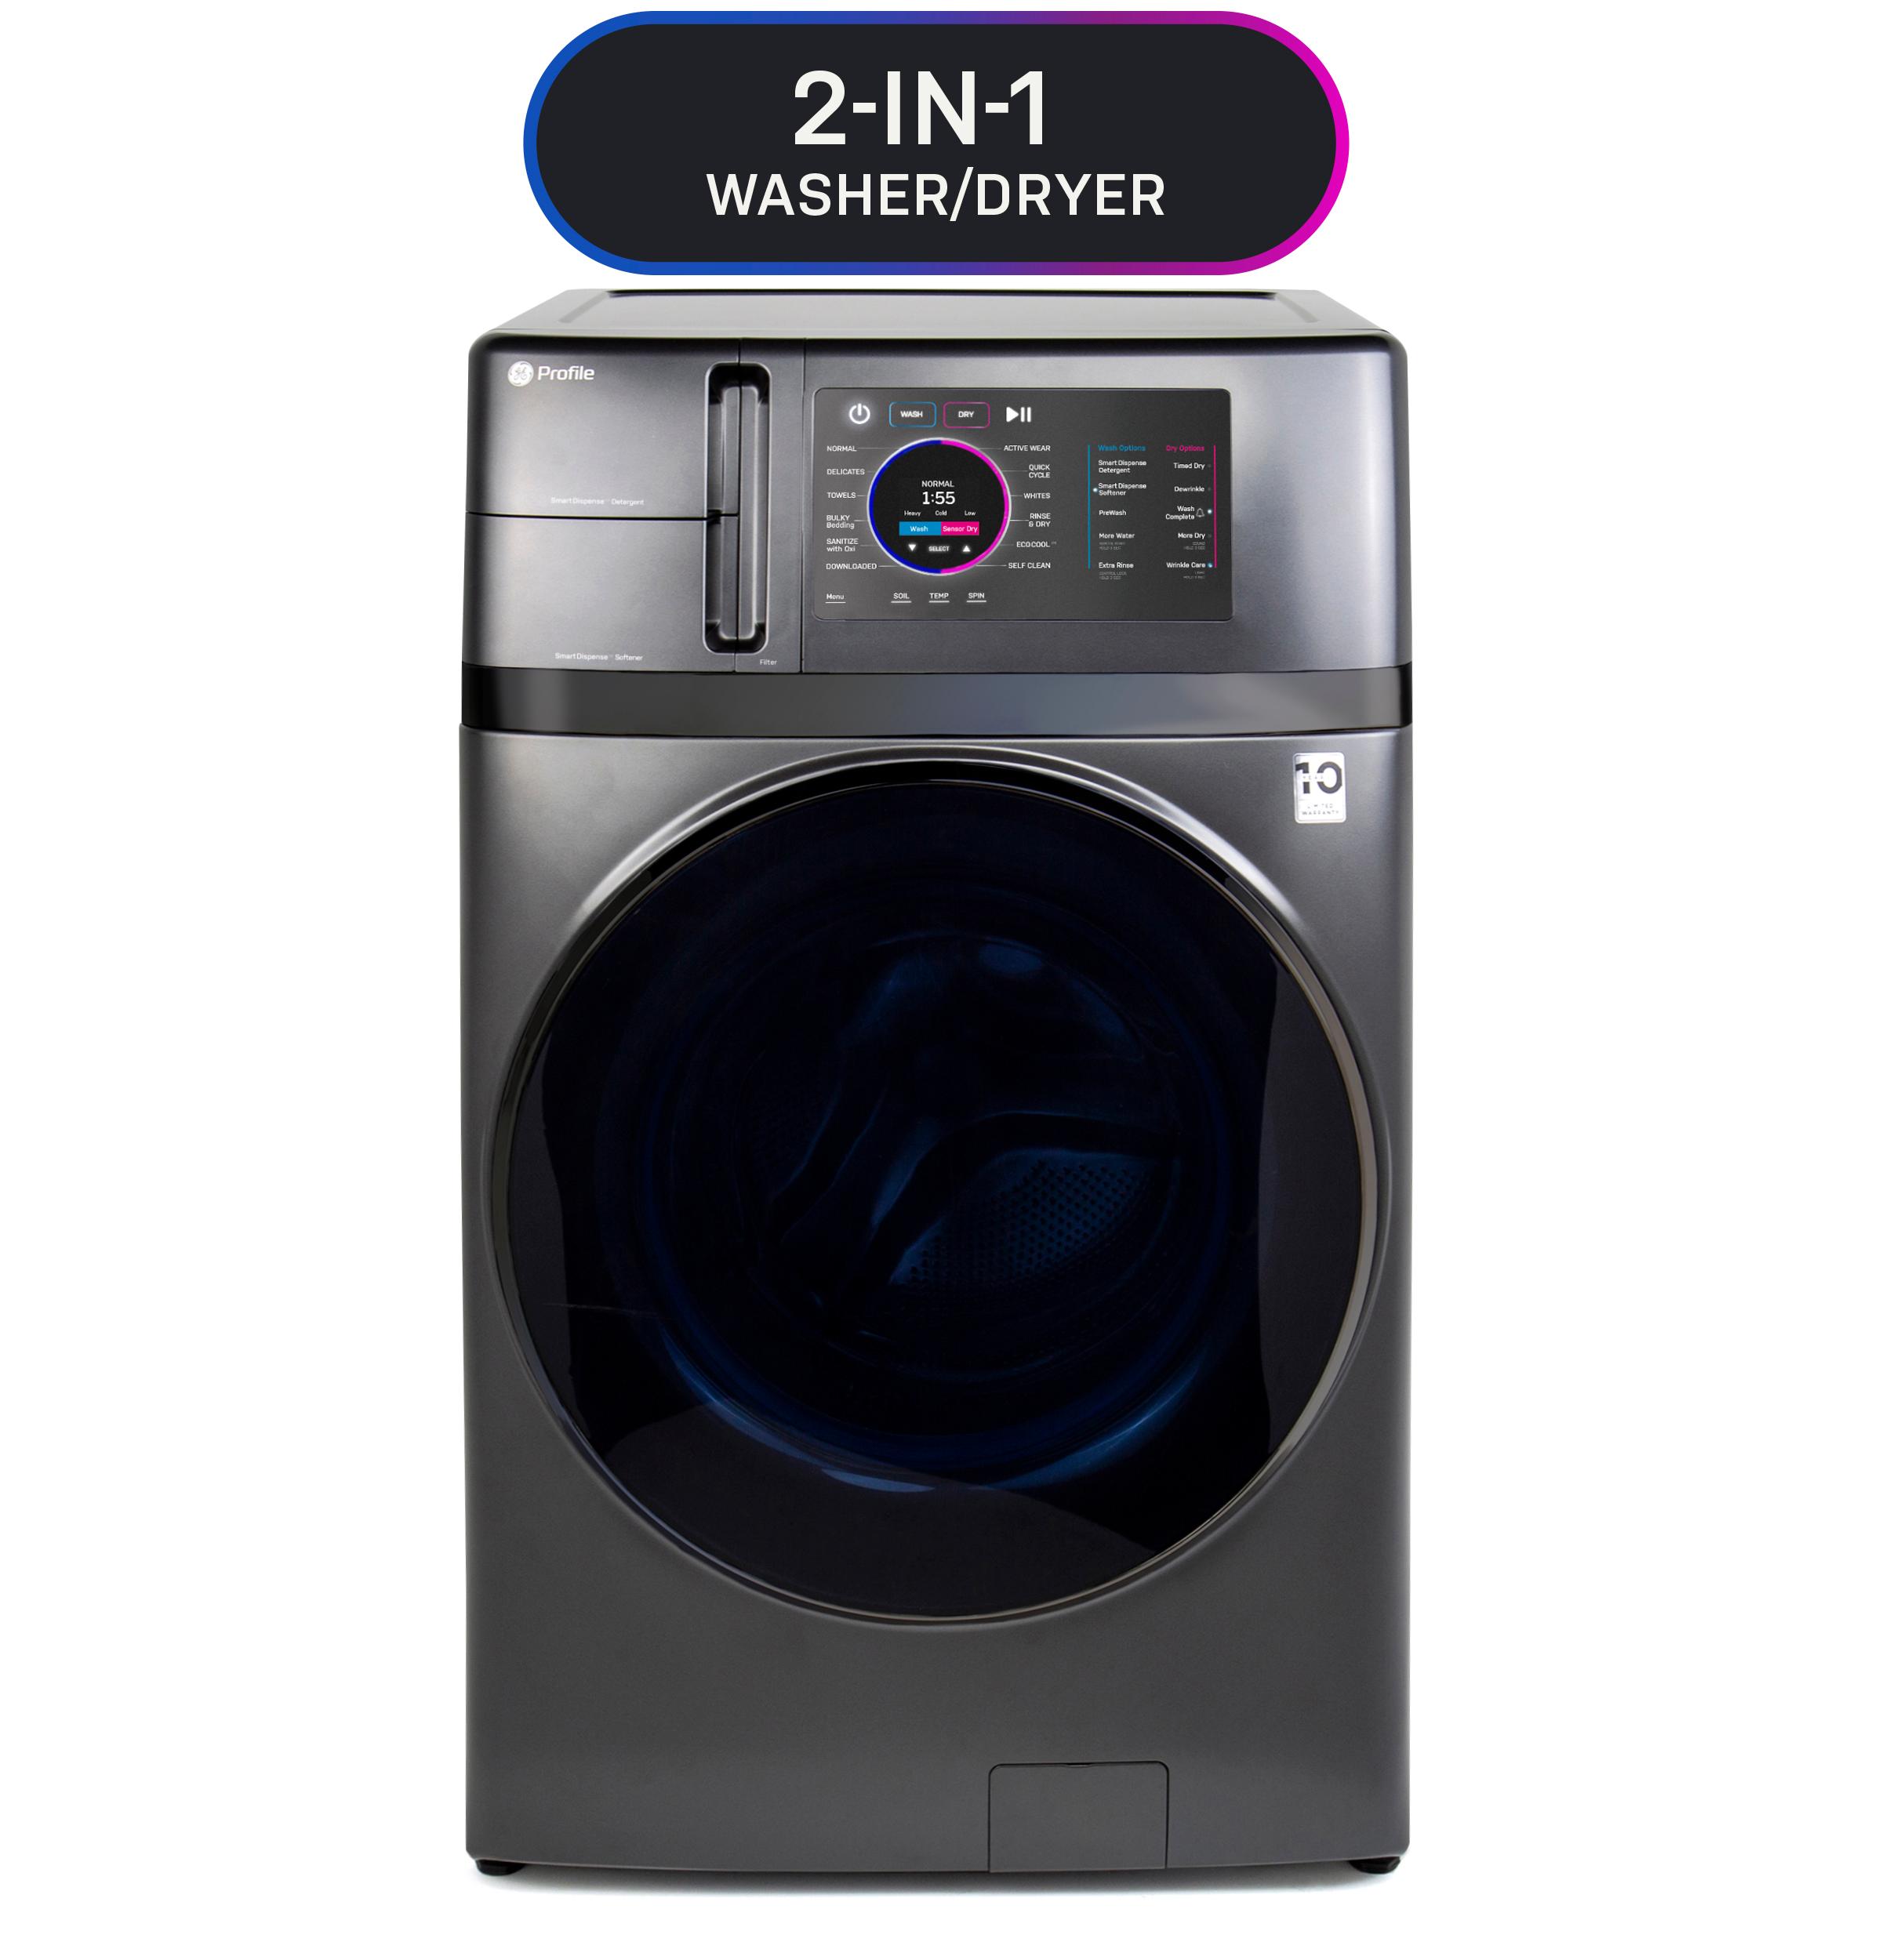 Ge Appliances PFQ97HSPVDS Ge Profile&#8482; 4.8 Cu. Ft. Capacity Ultrafast Combo With Ventless Heat Pump Technology Washer/Dryer